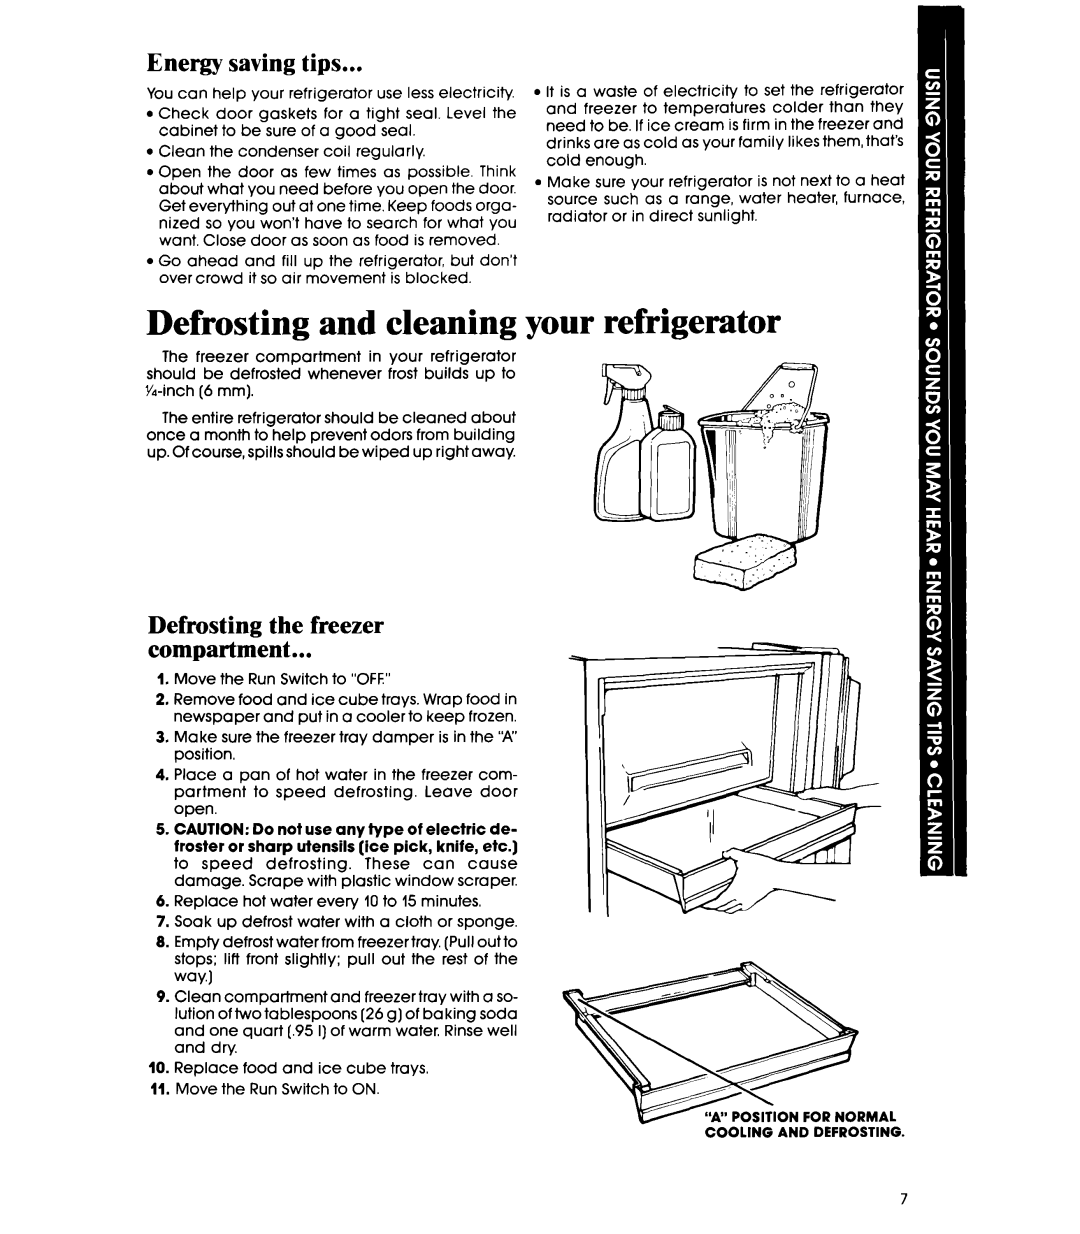 Whirlpool EL15SC manual Defrosting and cleaning your refrigerator, Energy saving tips, Defrosting the freezer compartment 